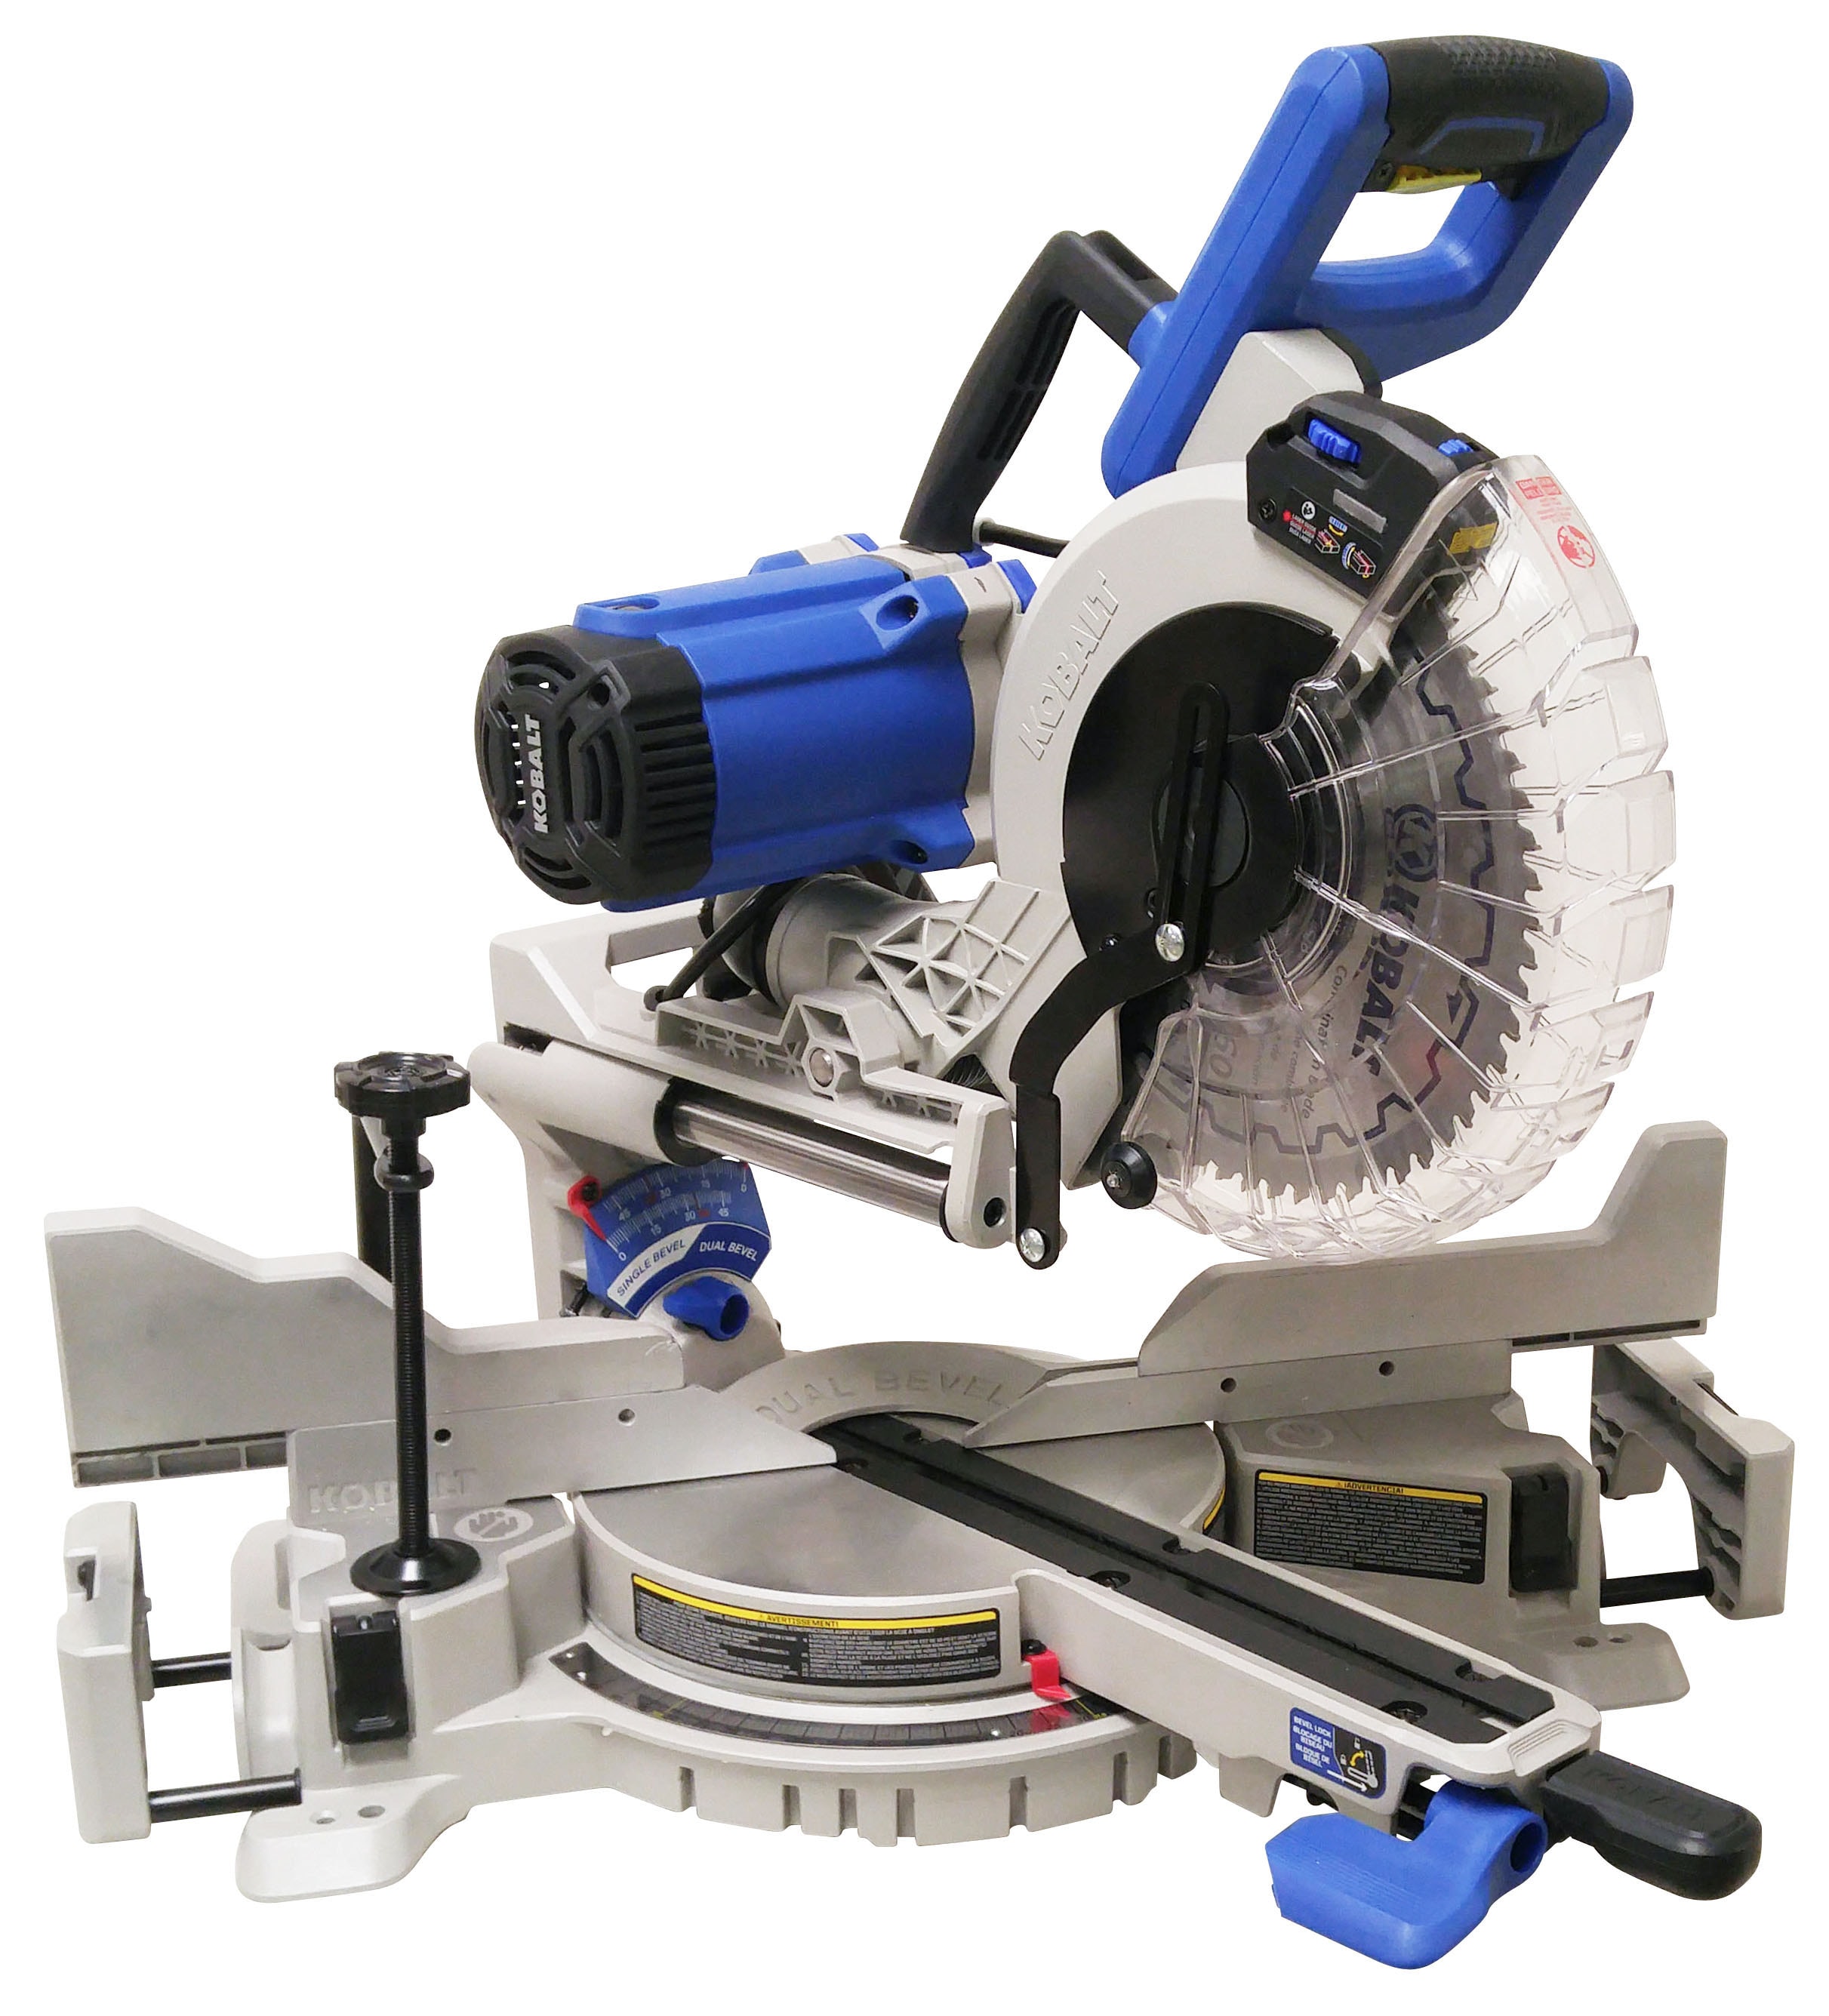 10-in 15-Amp Dual Bevel Sliding Compound Miter Saw with Laser Guide (Corded) | - Kobalt SM2517LW